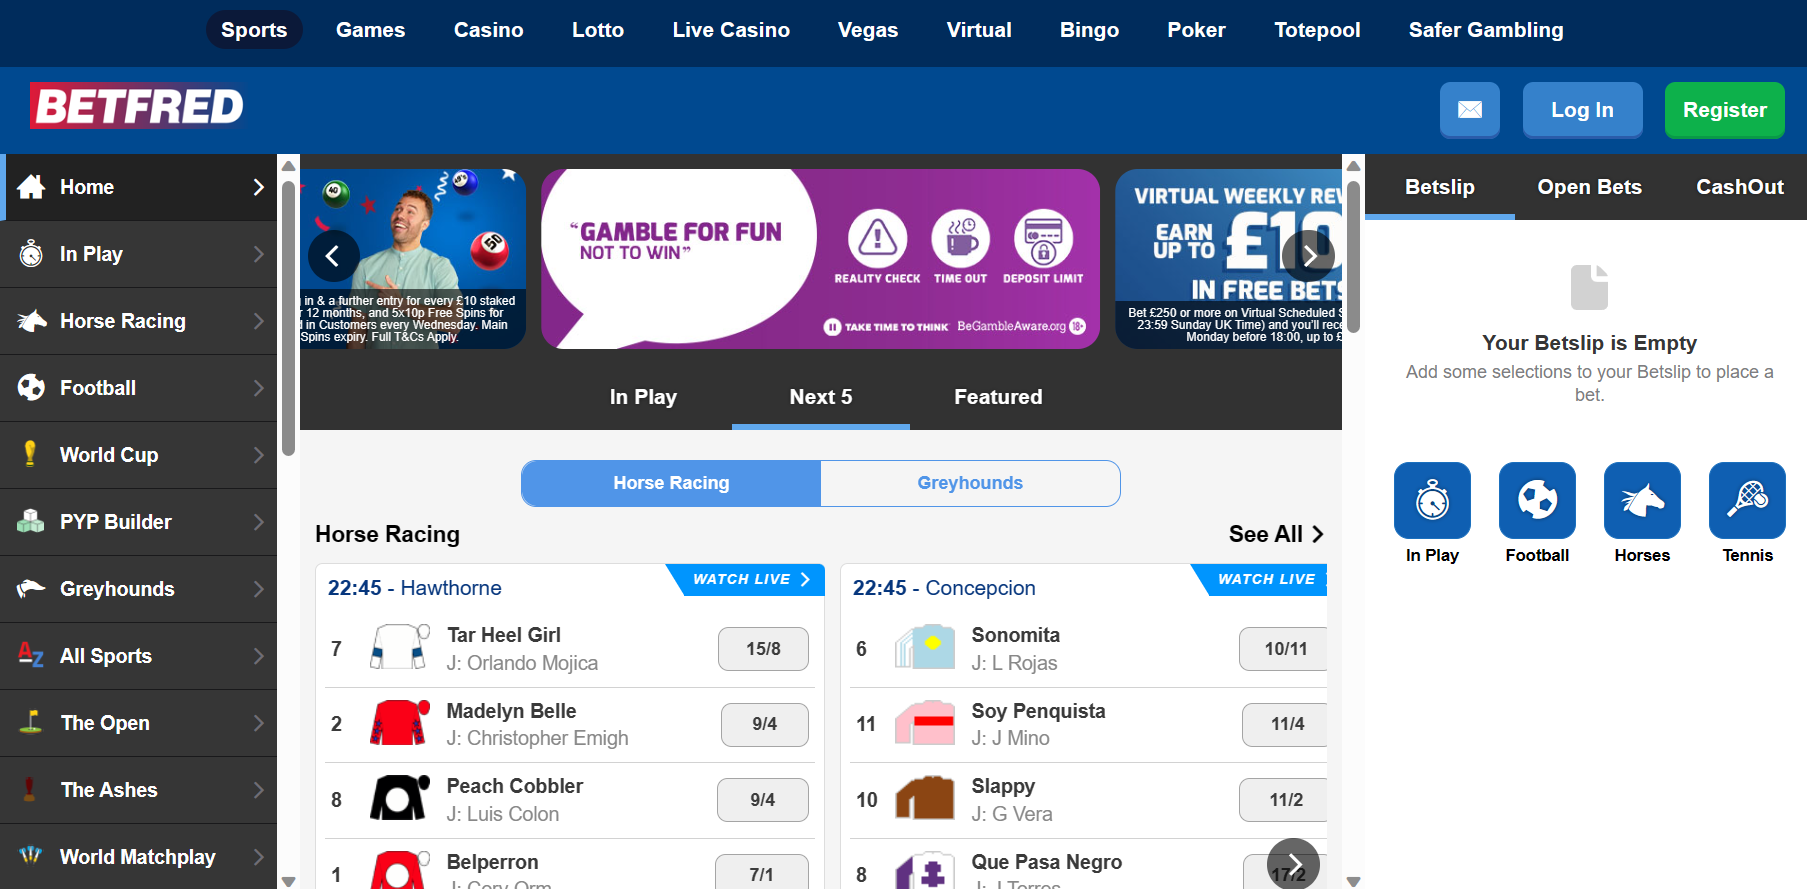 Betfred homepage, Betfred sign up offer, Betfred sign up personal details, Betfred sign up email address, Betfred sign up offer security, Betfred sign up offer address, Betfred sign up, Betfred promo code, Betfred promo code WELCOME40